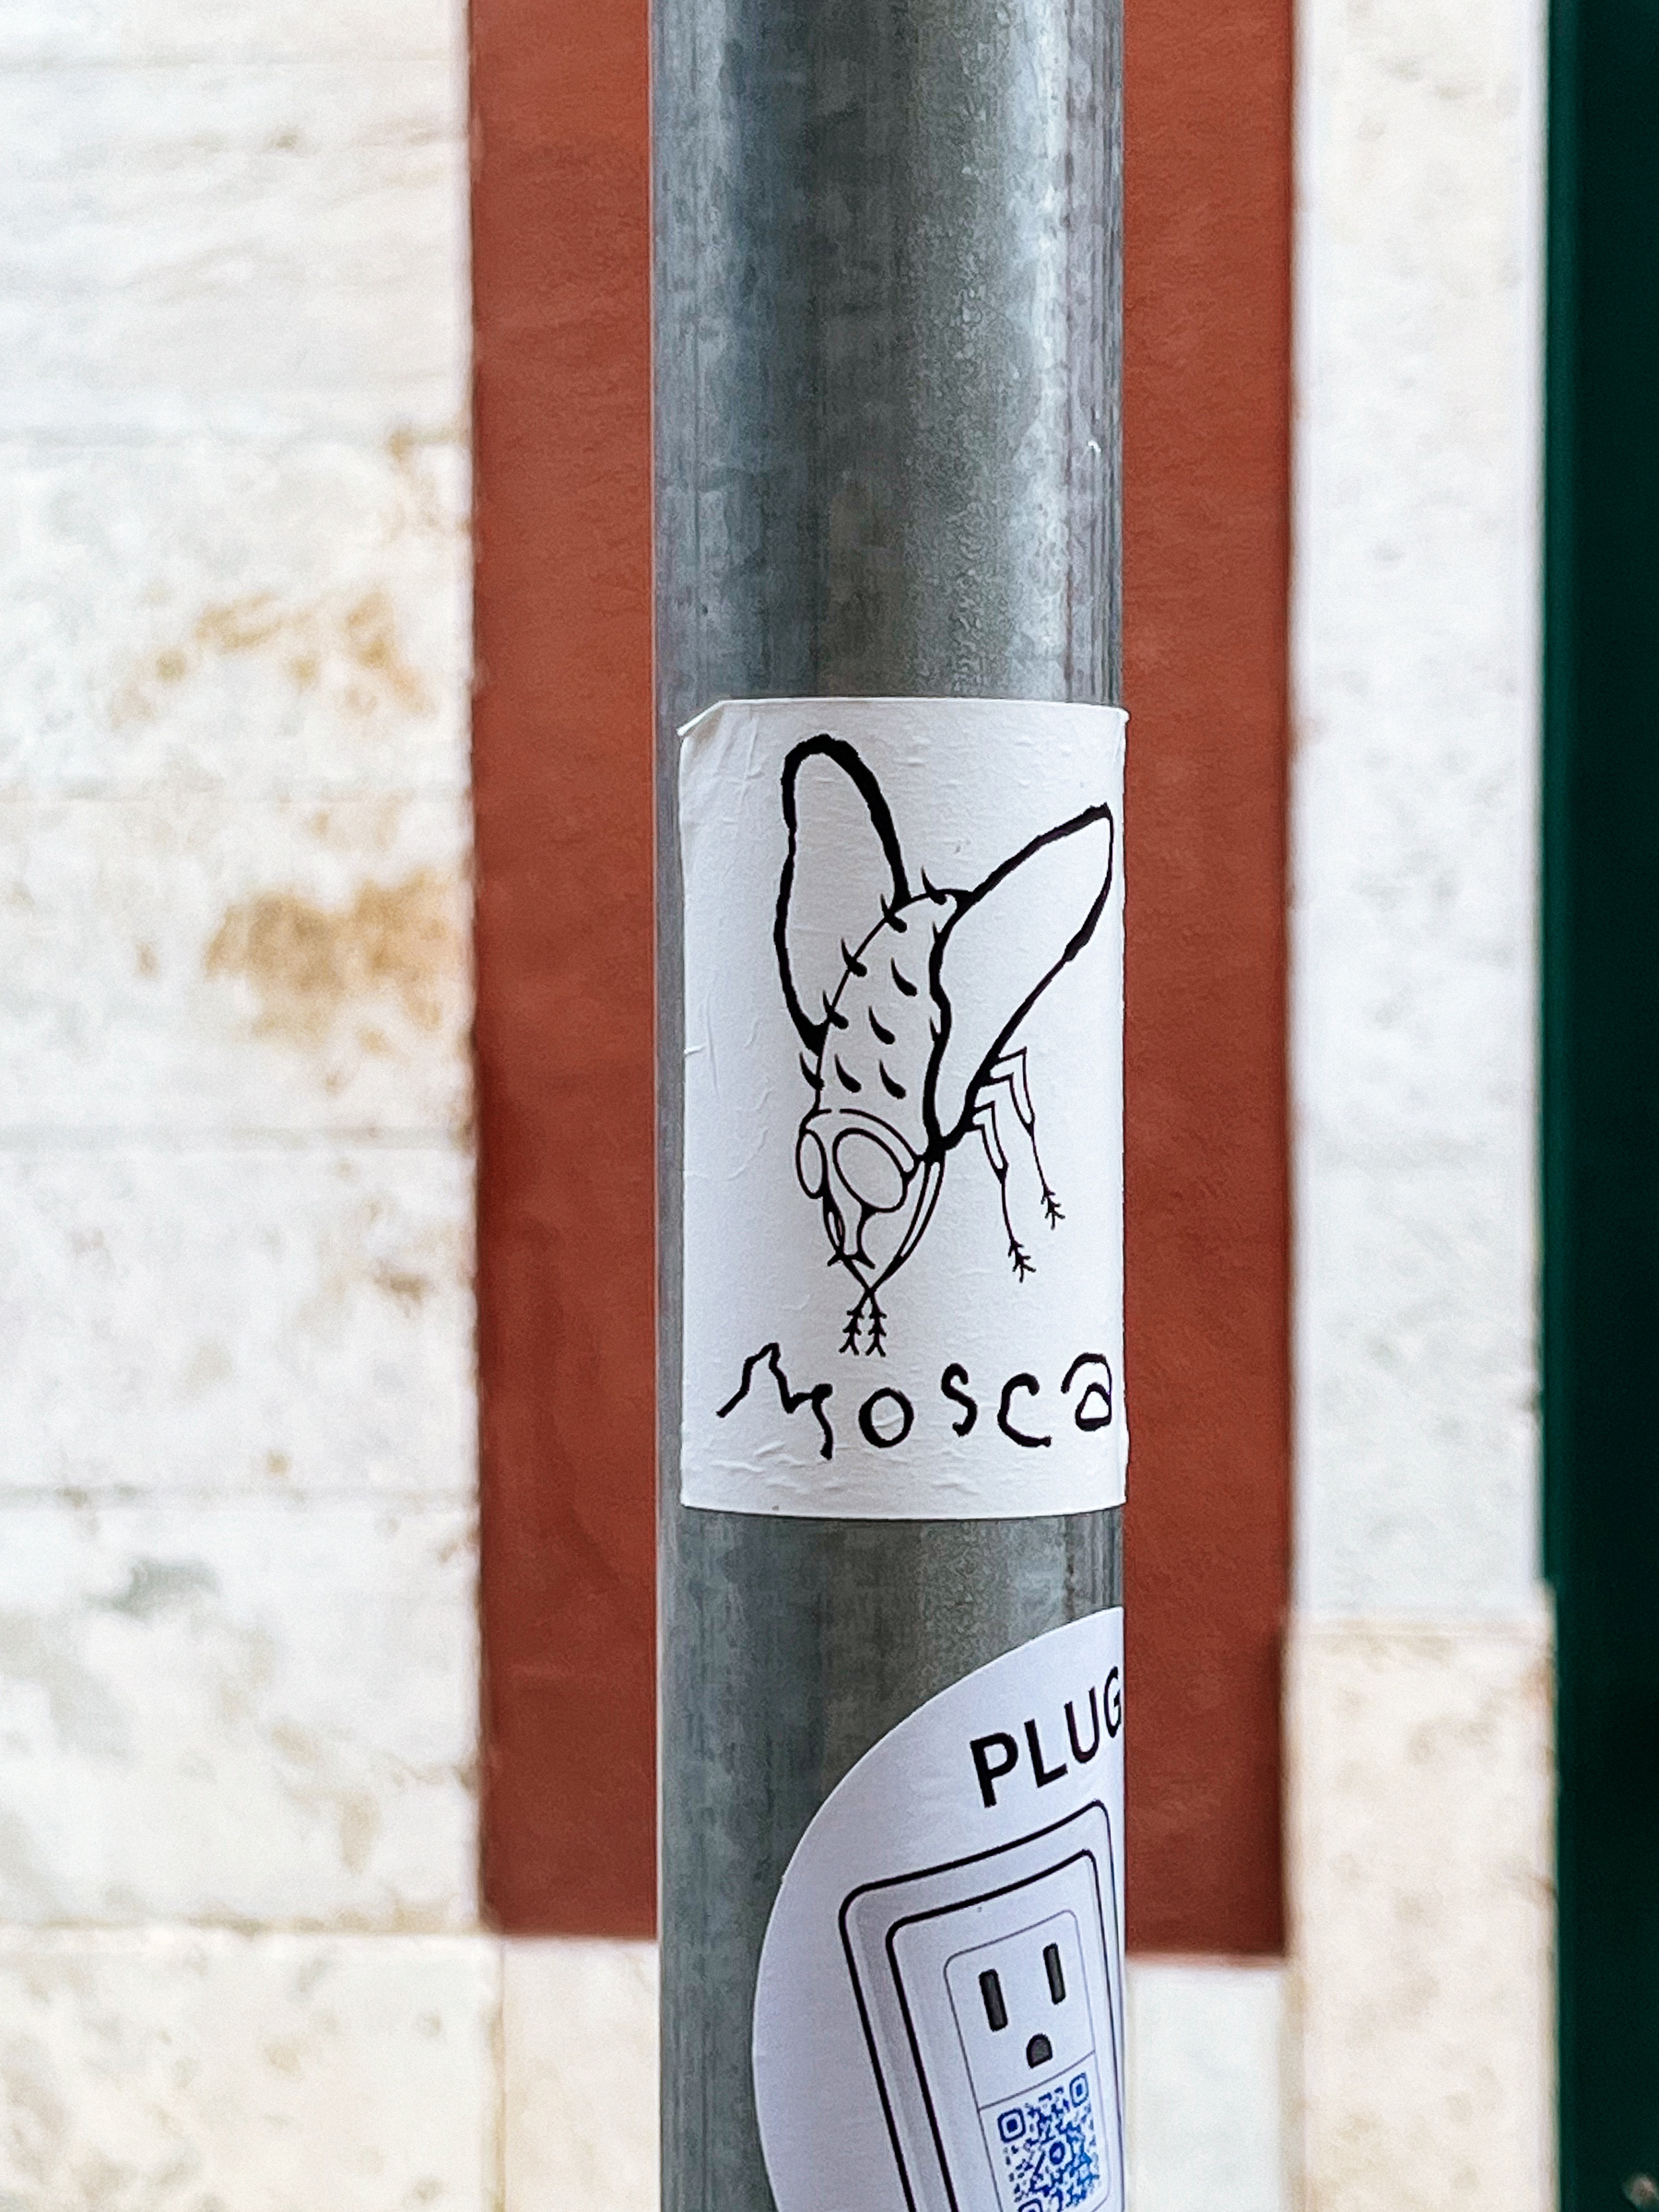 “Mosca”(Fly), and a very basic drawing of a fly. Look good, though. A sticker, of course. 